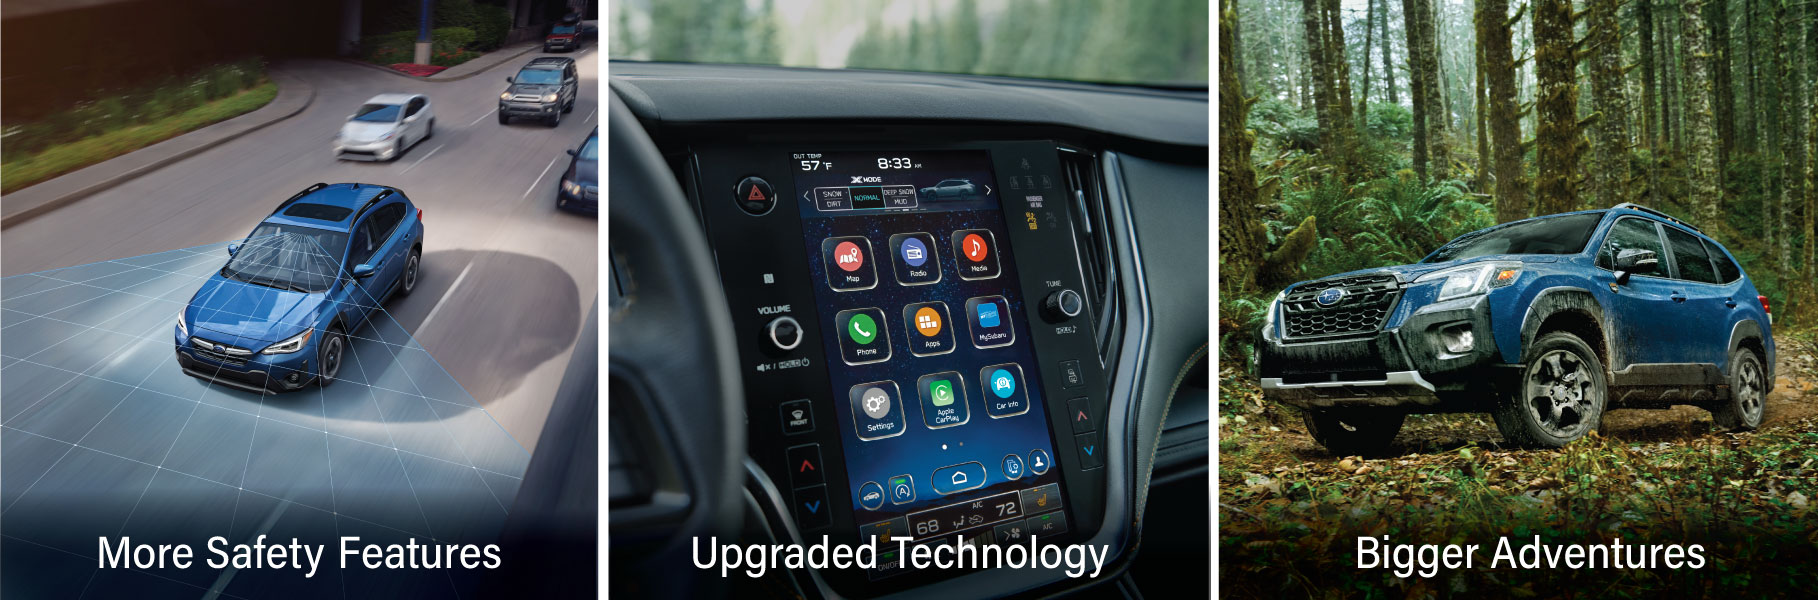 A Subaru Crosstrek in blue with the words "More Safety Features". An 8-inch available touchscreen with the words "Upgraded Technology". A blue Subaru outback wilderness with the words "Bigger Adventures";.